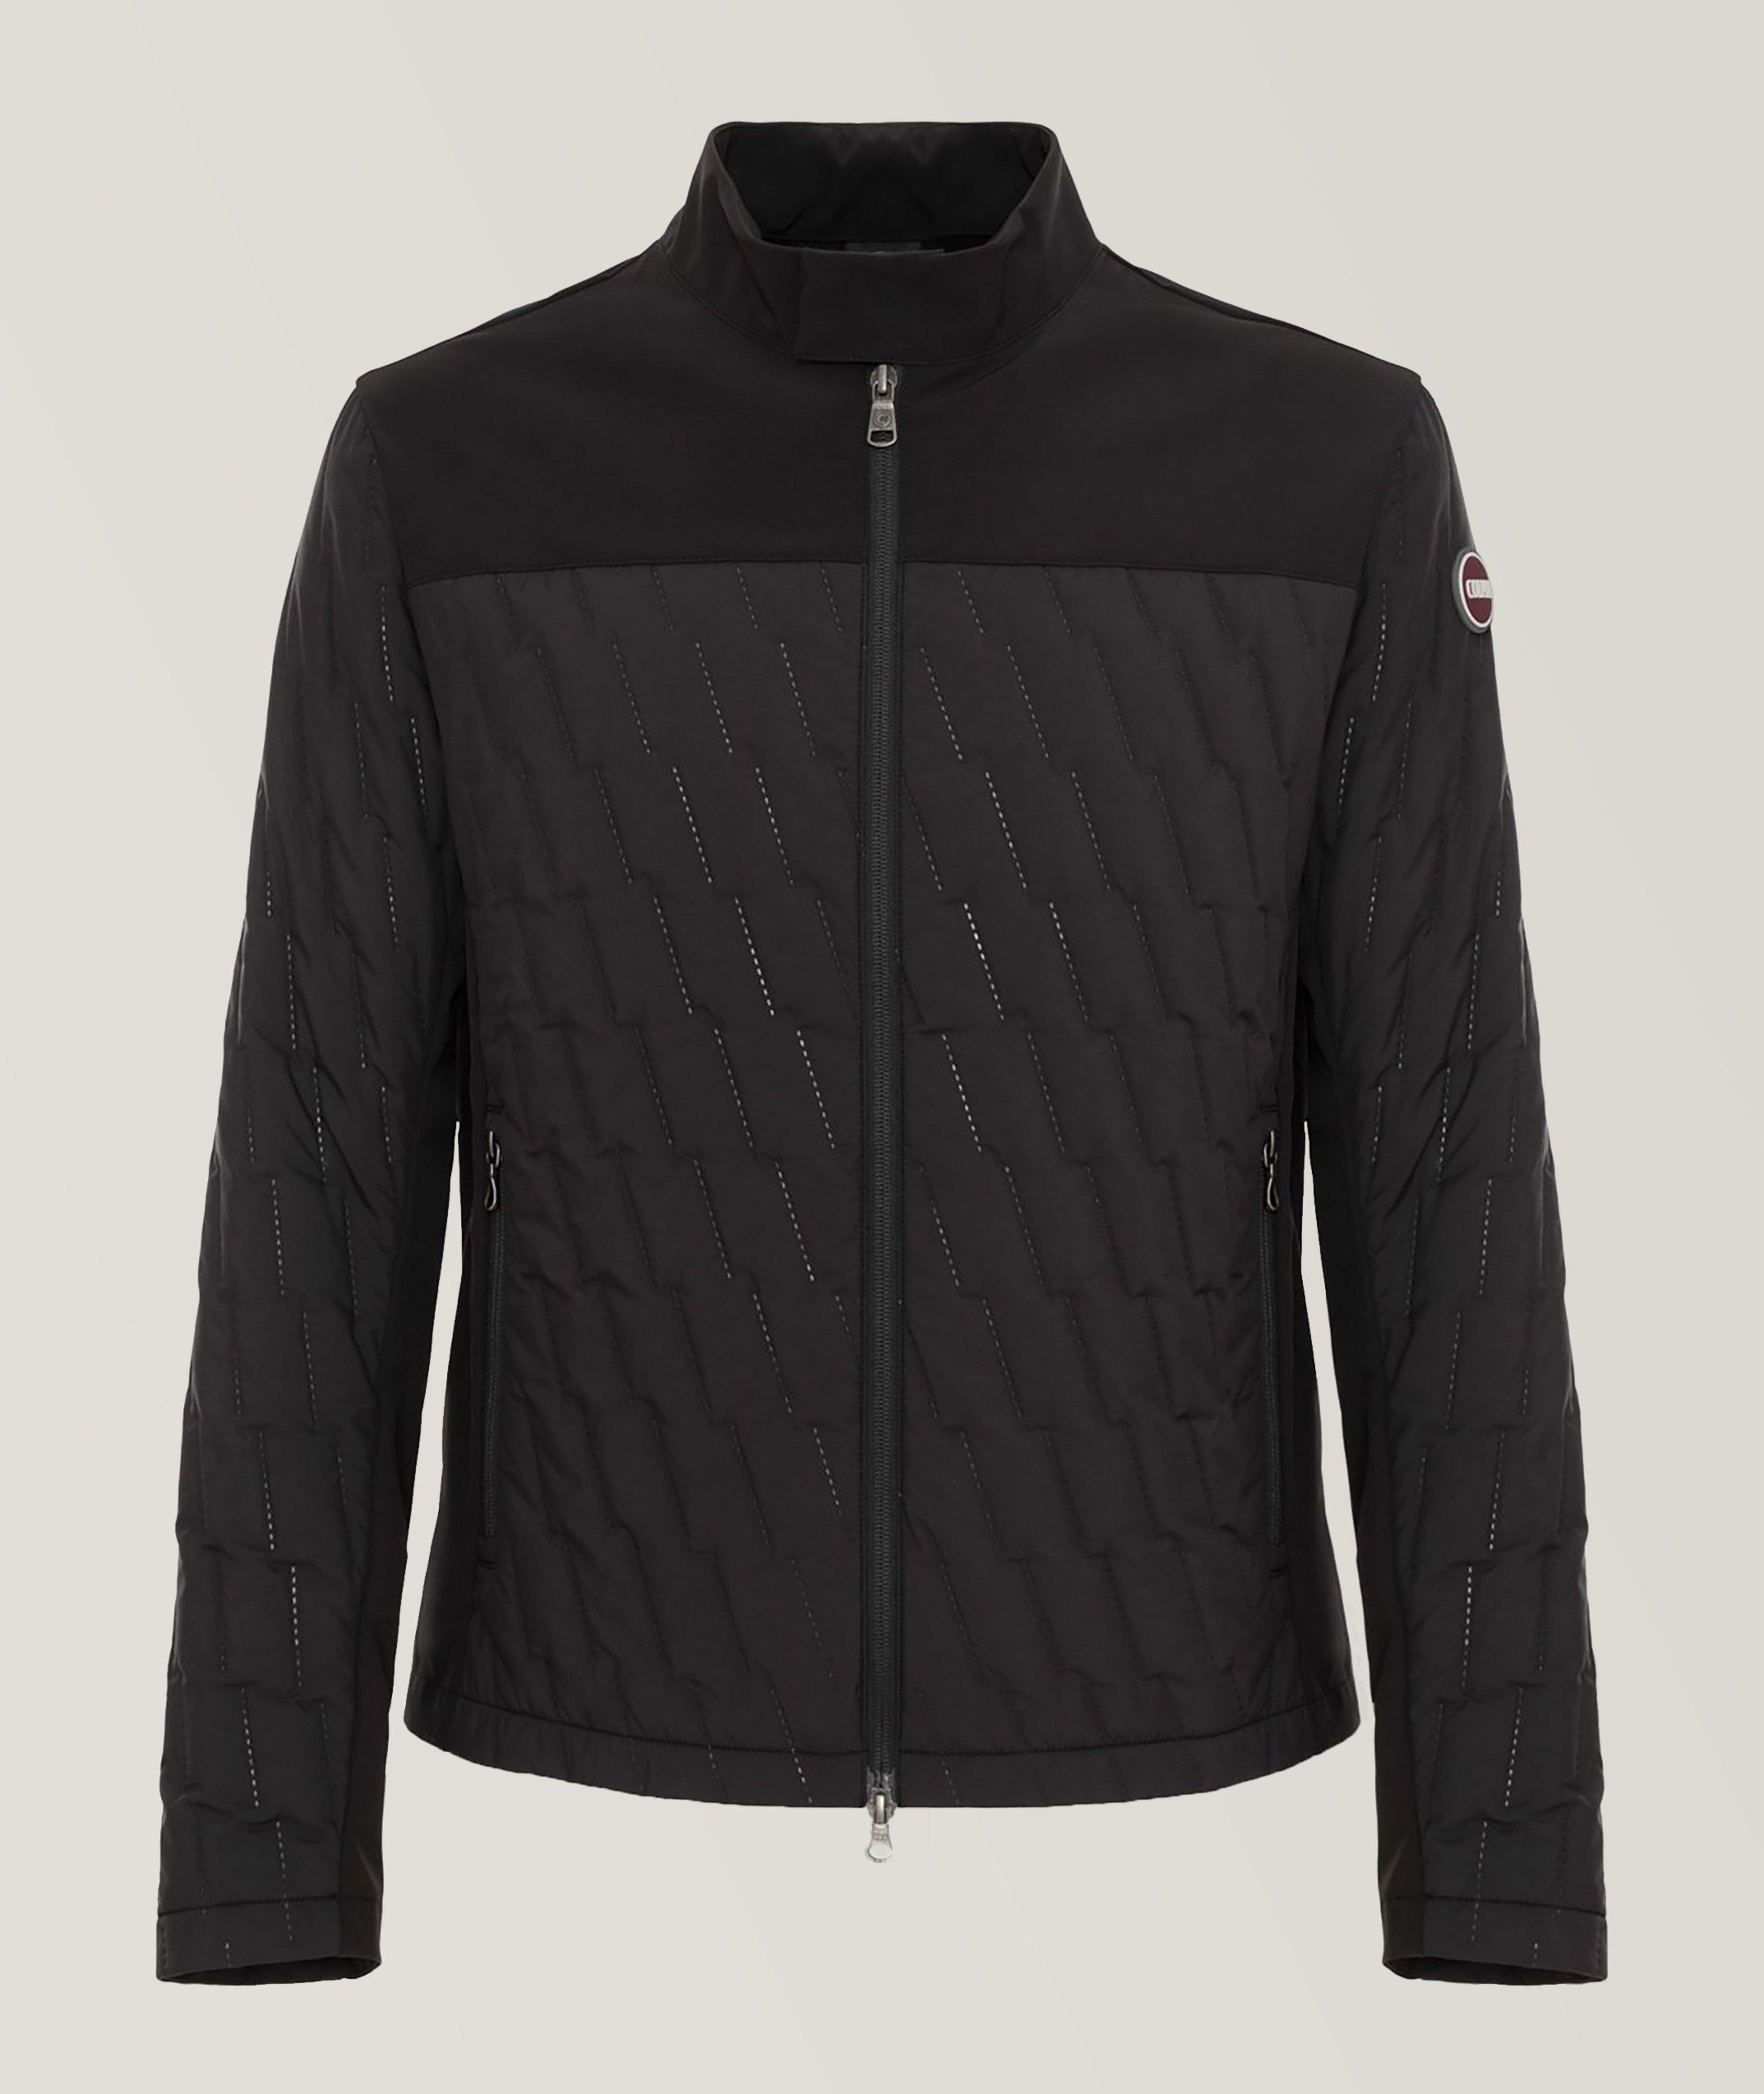 Ultrasound Diagonal Quilted Jacket image 0